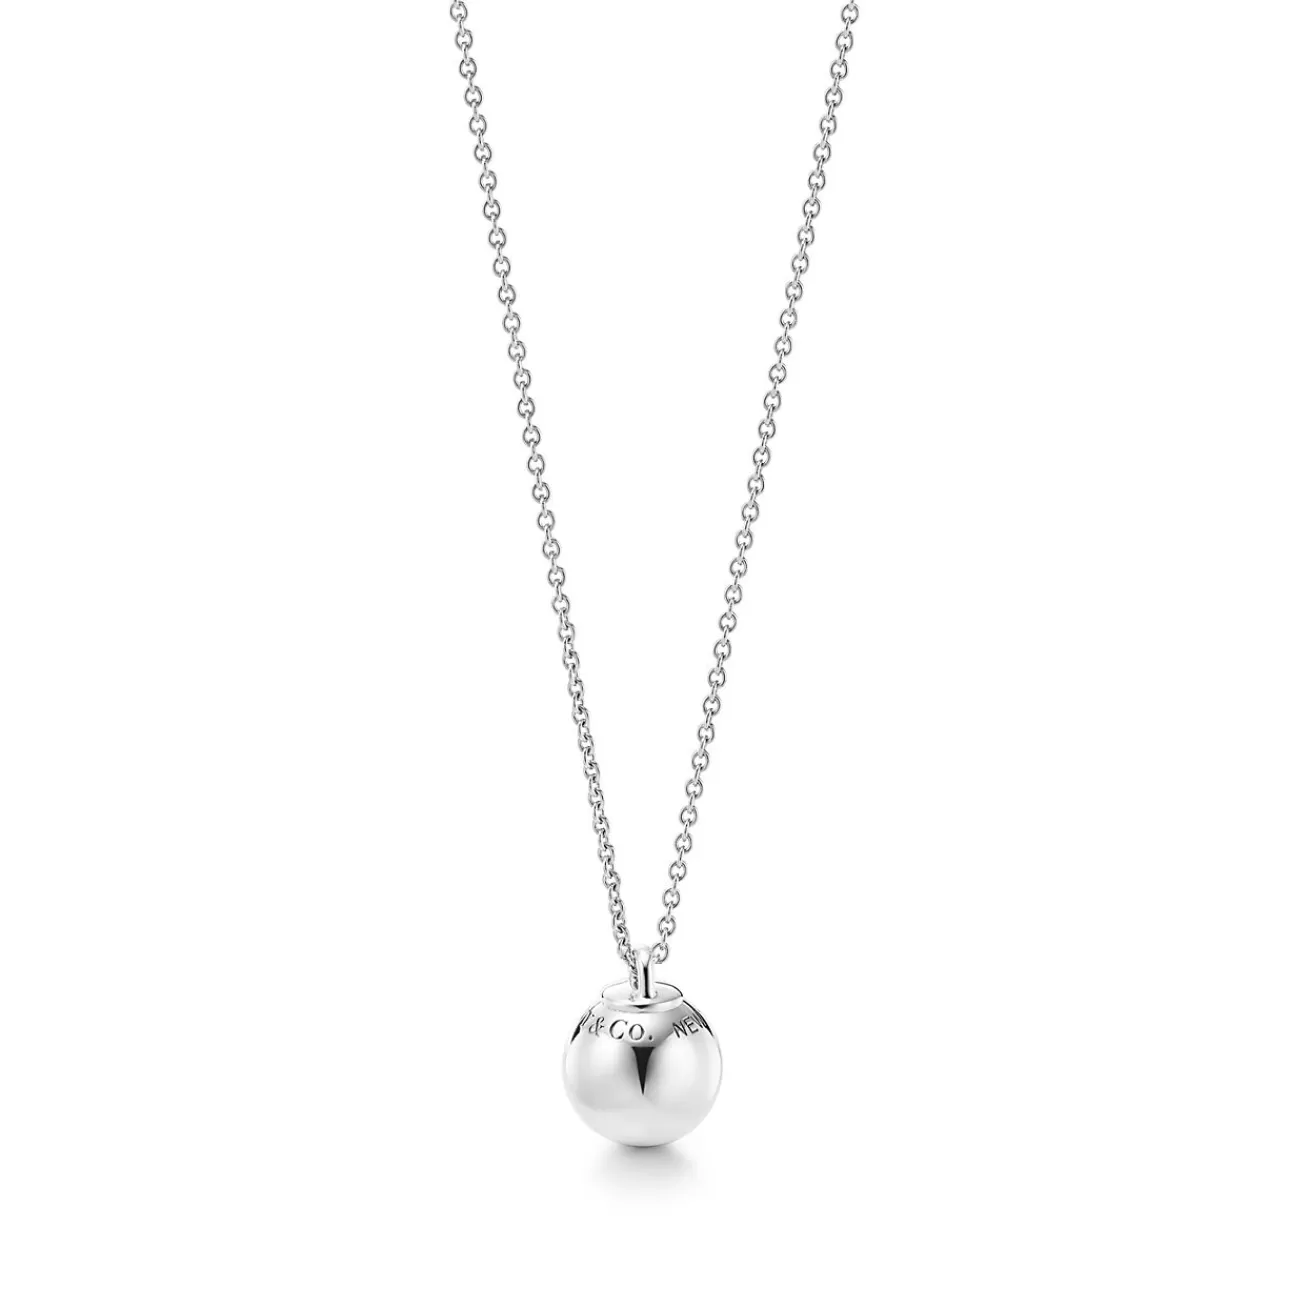 Tiffany & Co. Shop Tiffany HardWear Sterling Silver Ball Pendant | ^ Necklaces & Pendants | Gifts for Her